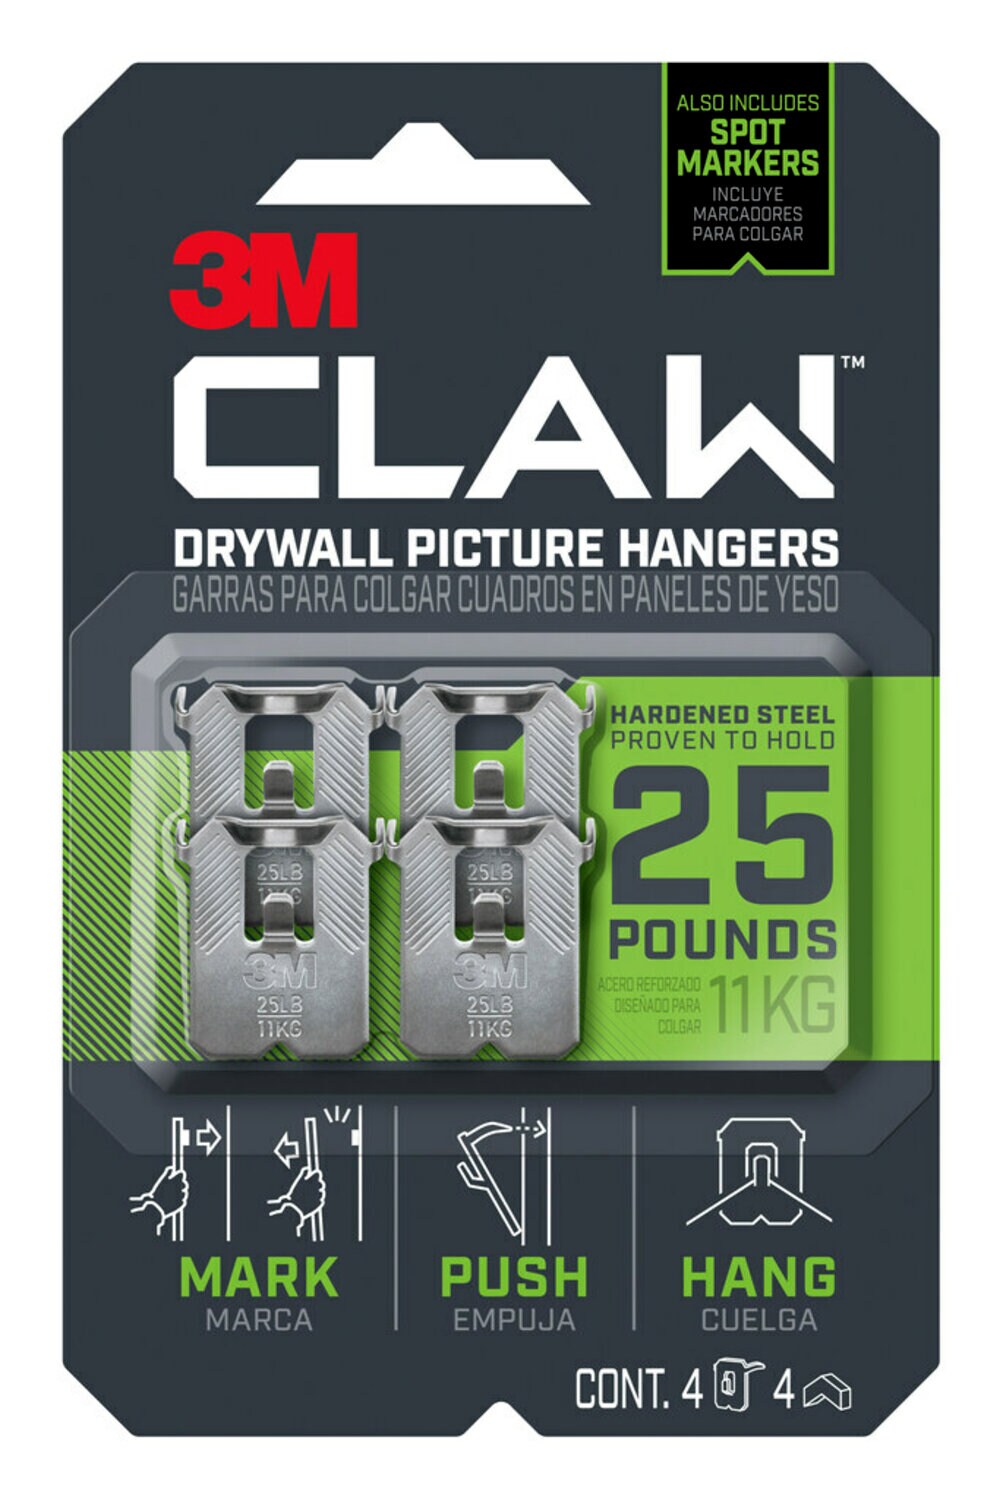 7100220649 - 3M CLAW Drywall Picture Hanger 25 lb with Temporary Spot Marker 3PH25M-4ES-ALT, 4 hangers, 4 markers